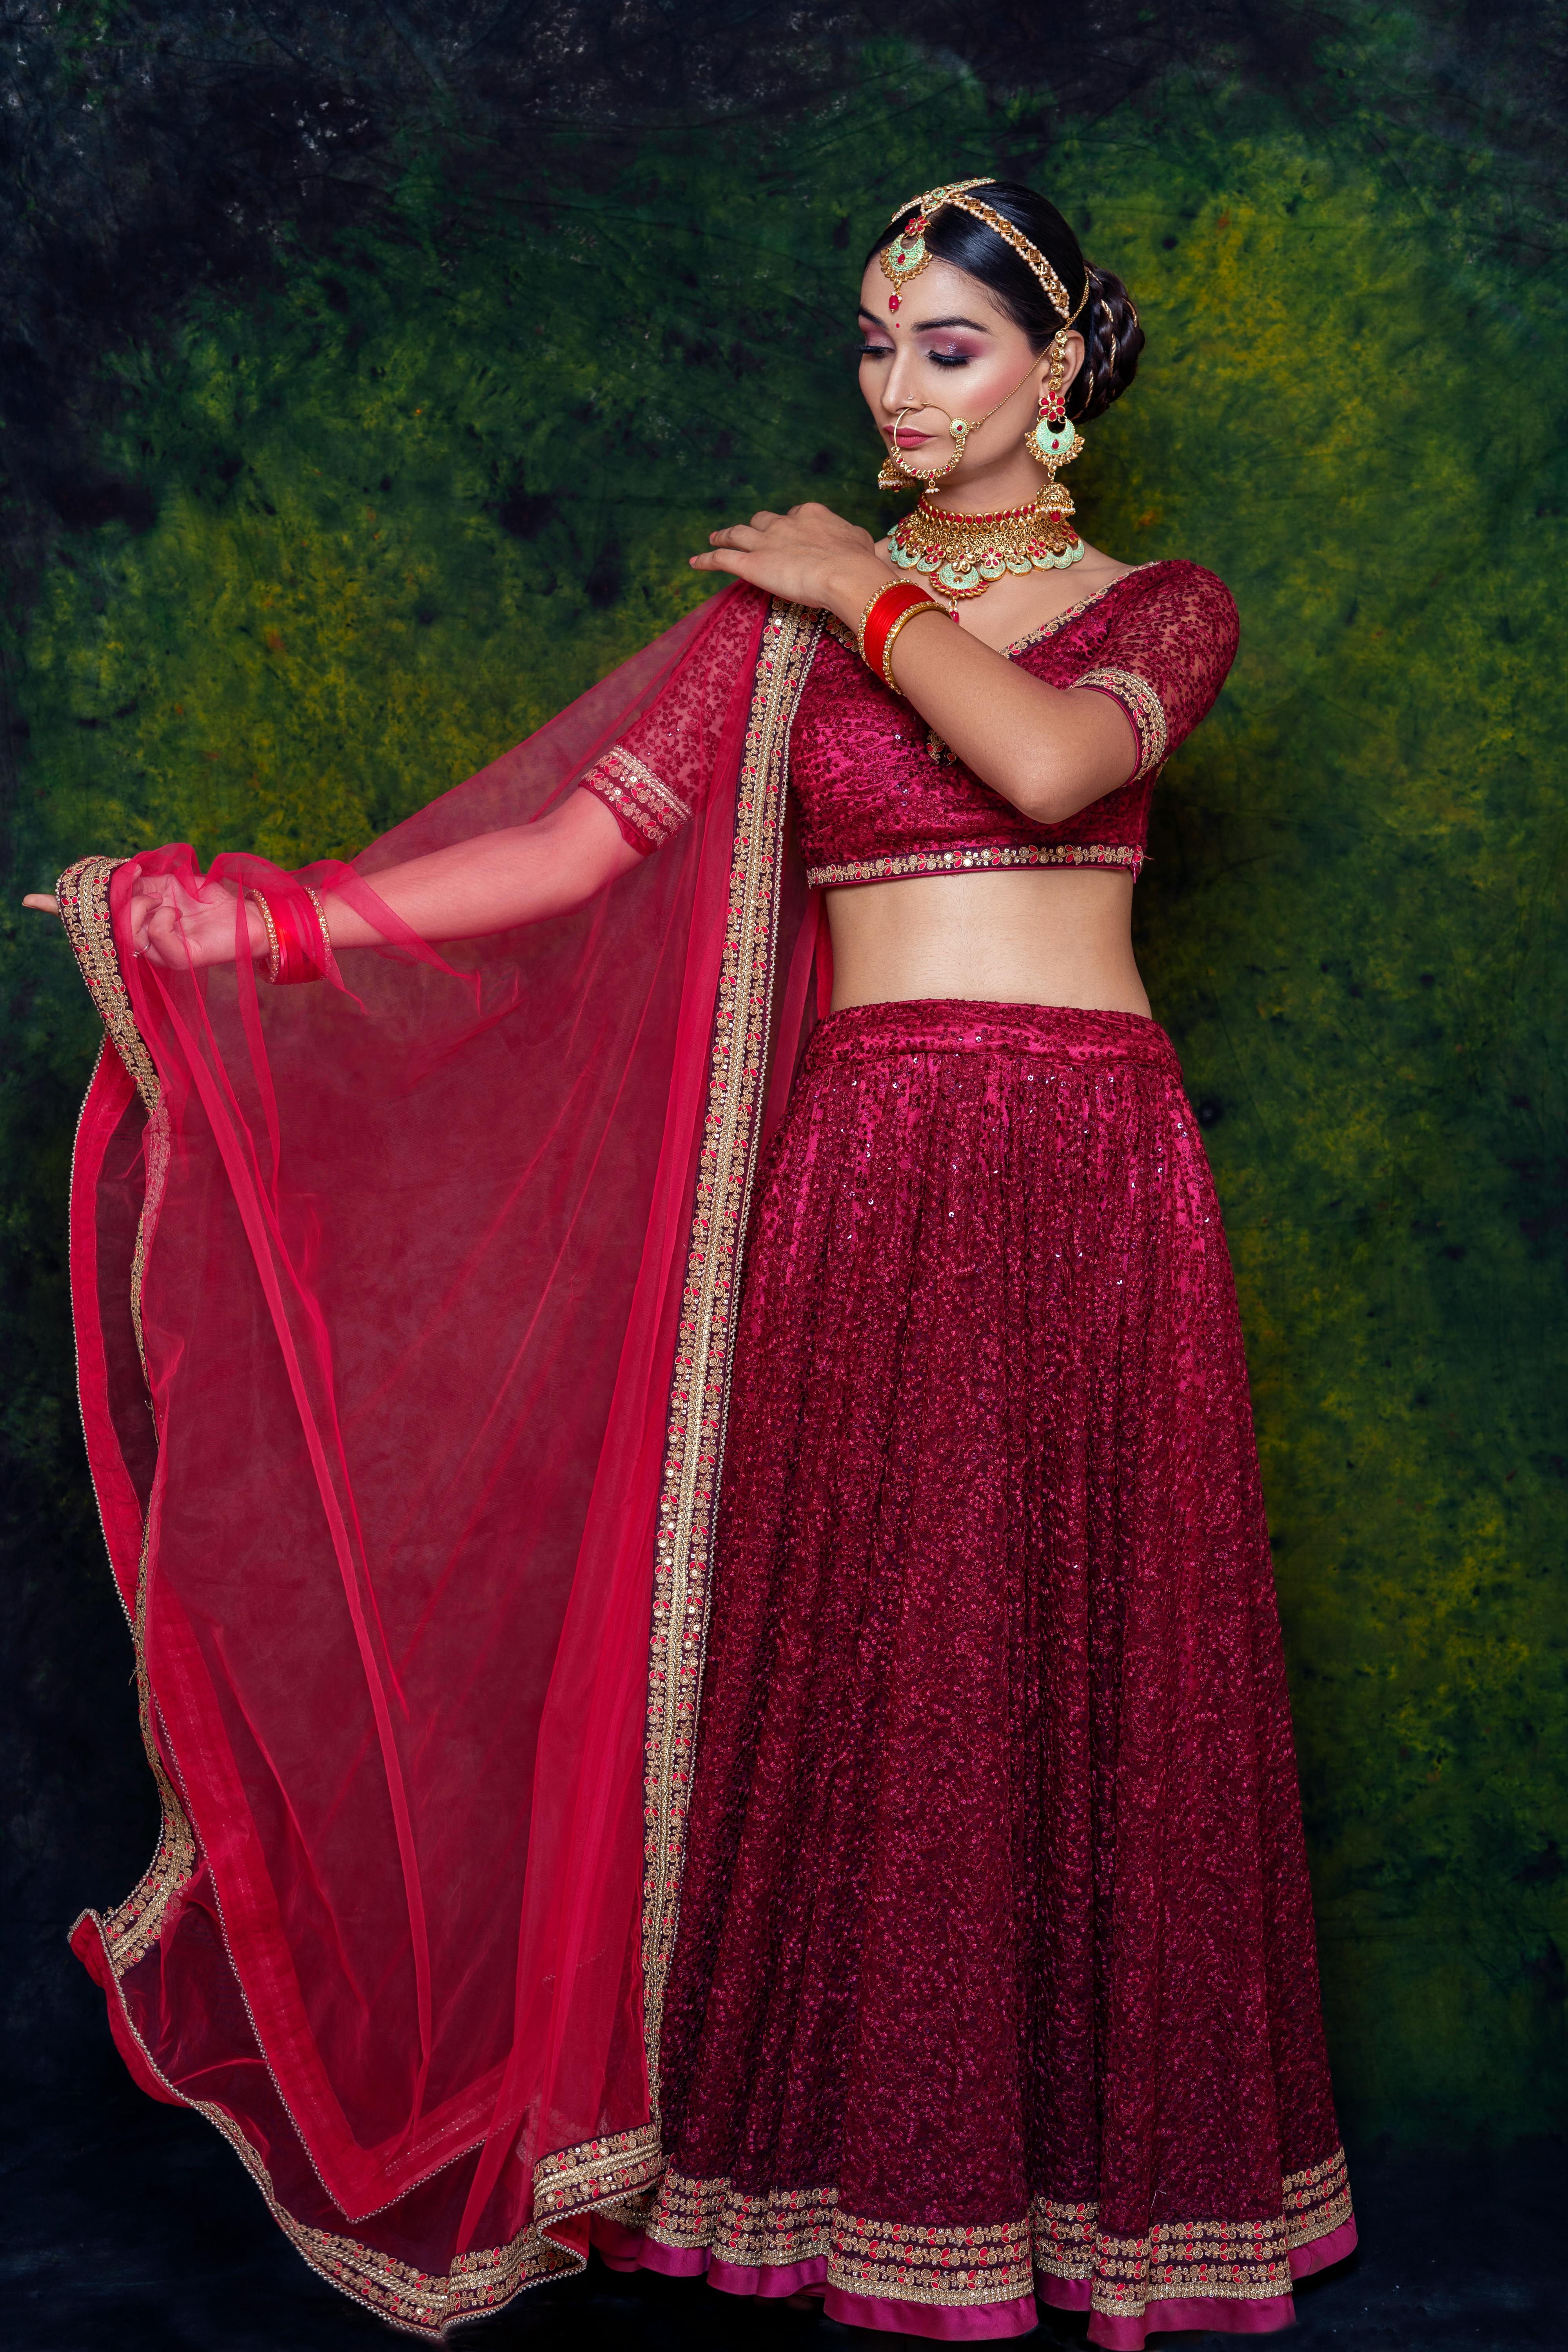 7 Stunning Red Lehengas for the Bride! | POPxo